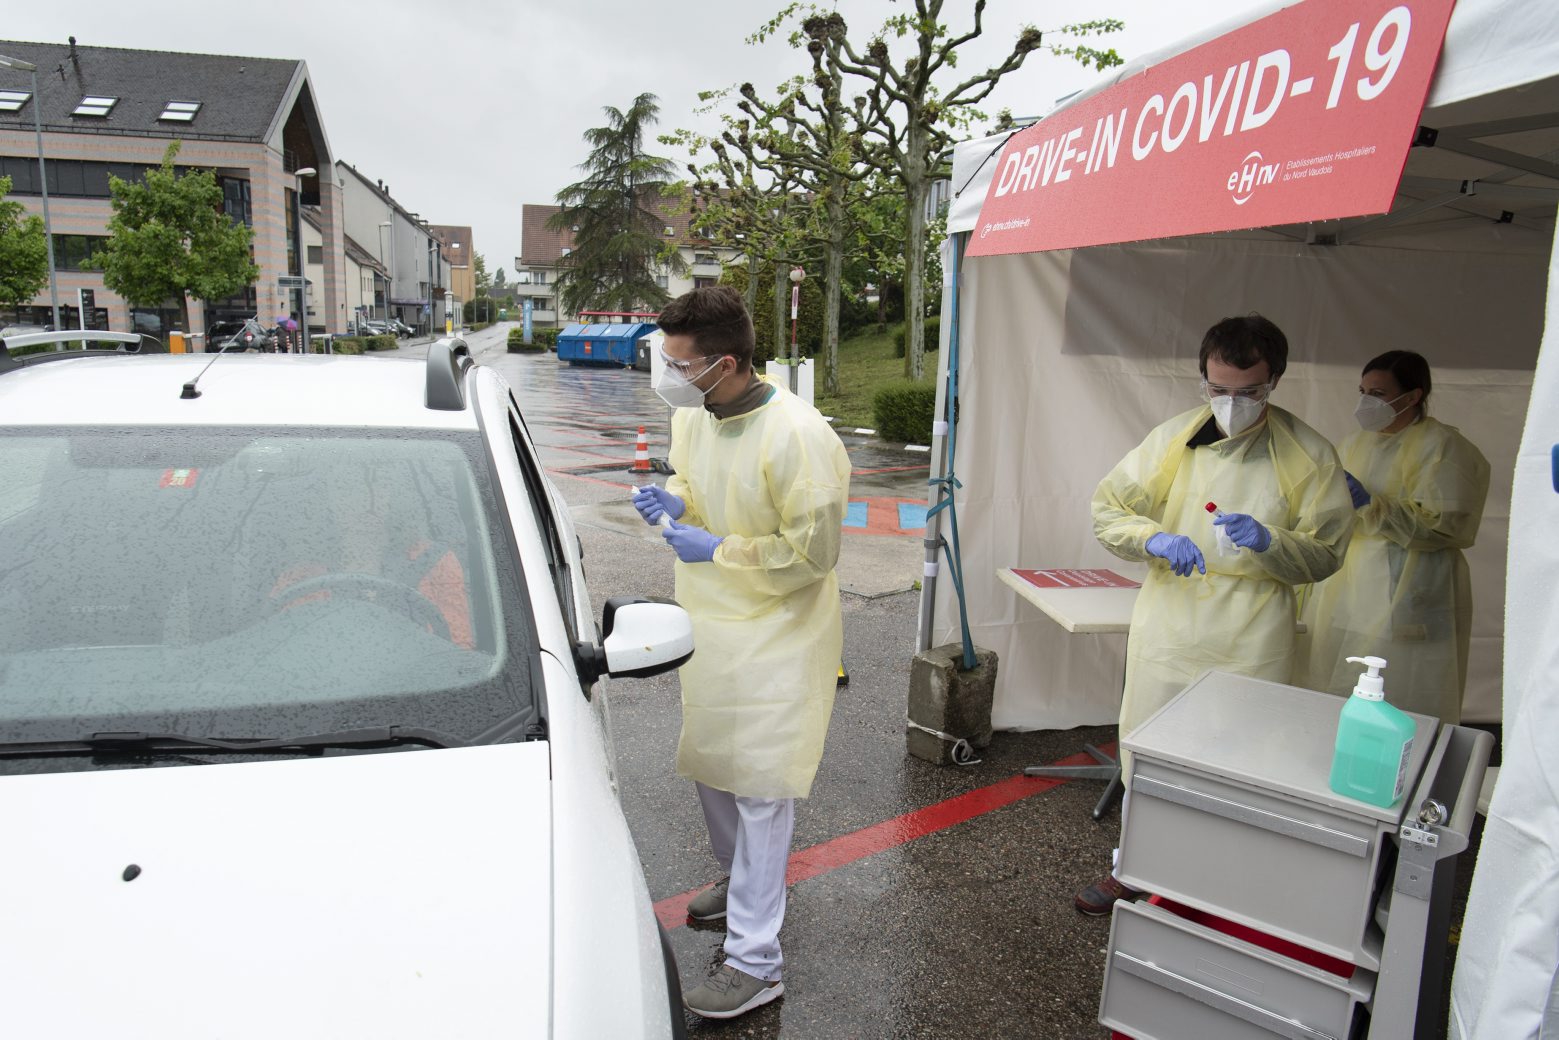 Medical workers take a swab at a drive-in coronavirus testing facility in front of the eHnv hospital eHnv "Etablissements Hospitaliers du Nord Vaudois" during the state of emergency of the coronavirus disease (COVID-19) outbreak, in Yverdon-les-bains, Switzerland, Thursday, April 30, 2020. Countries around the world are taking increased measures to stem the widespread of the SARS-CoV-2 coronavirus which causes the Covid-19 disease. (KEYSTONE/Laurent Gillieron) SWITZERLAND CORONAVIRUS OUTBREAK